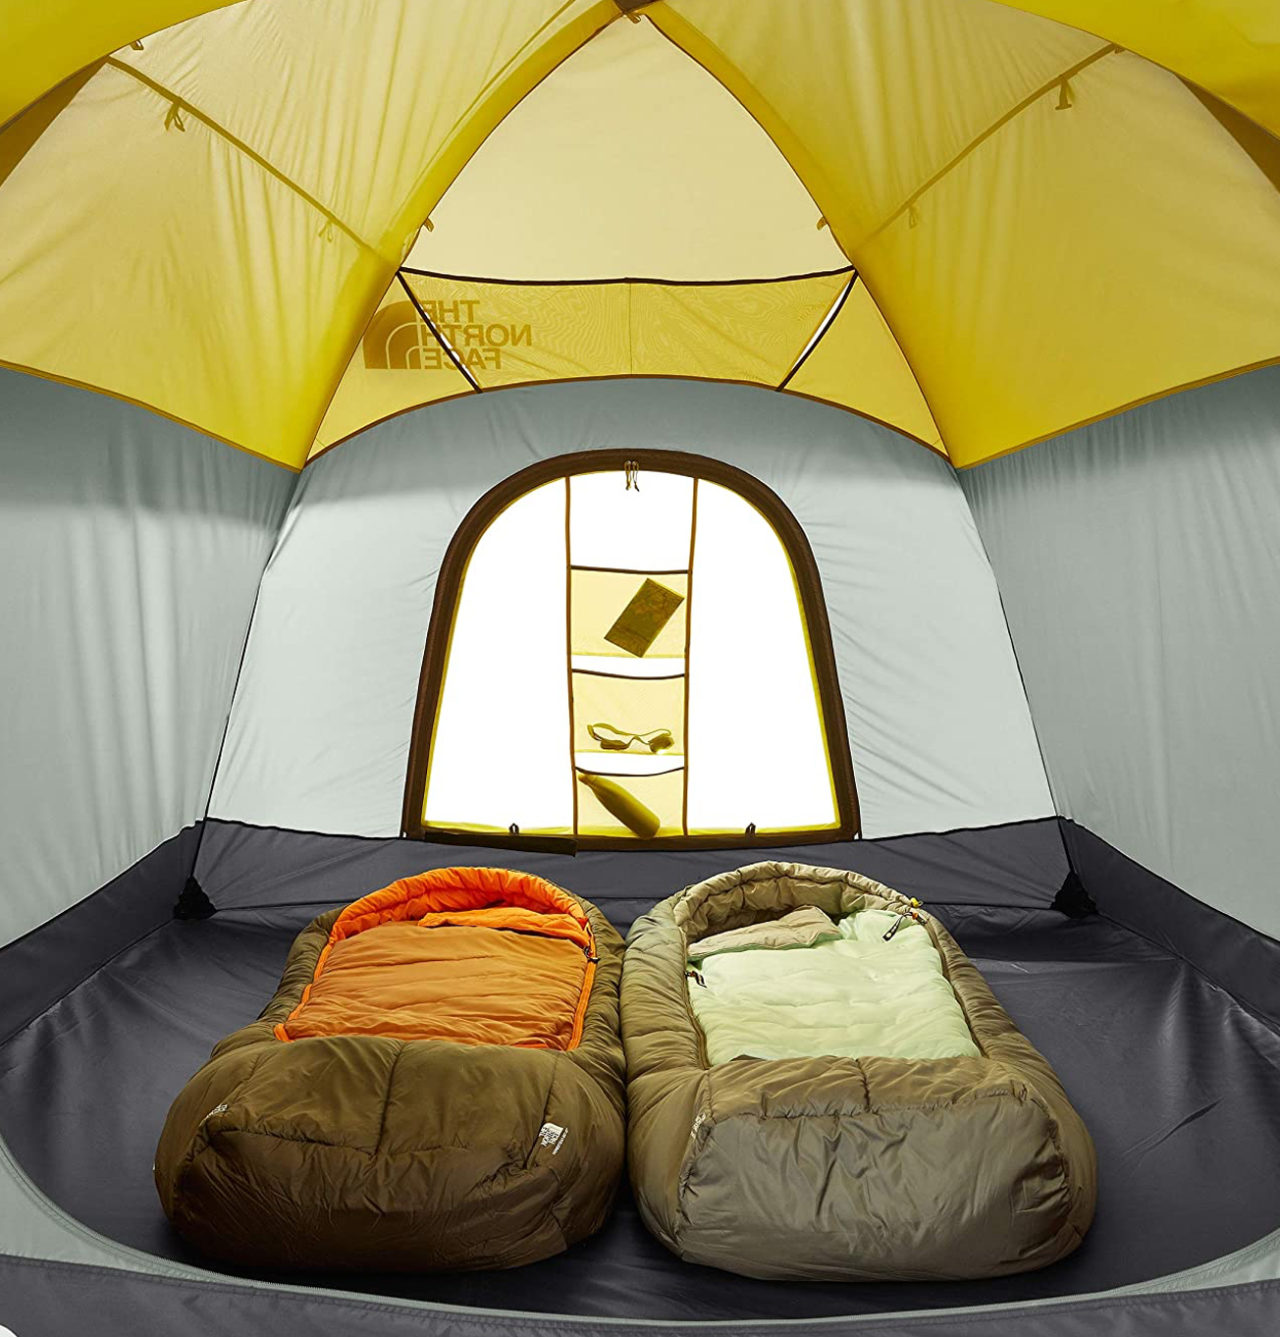 The North Face Wawona 6 Six-Person Camping Tent